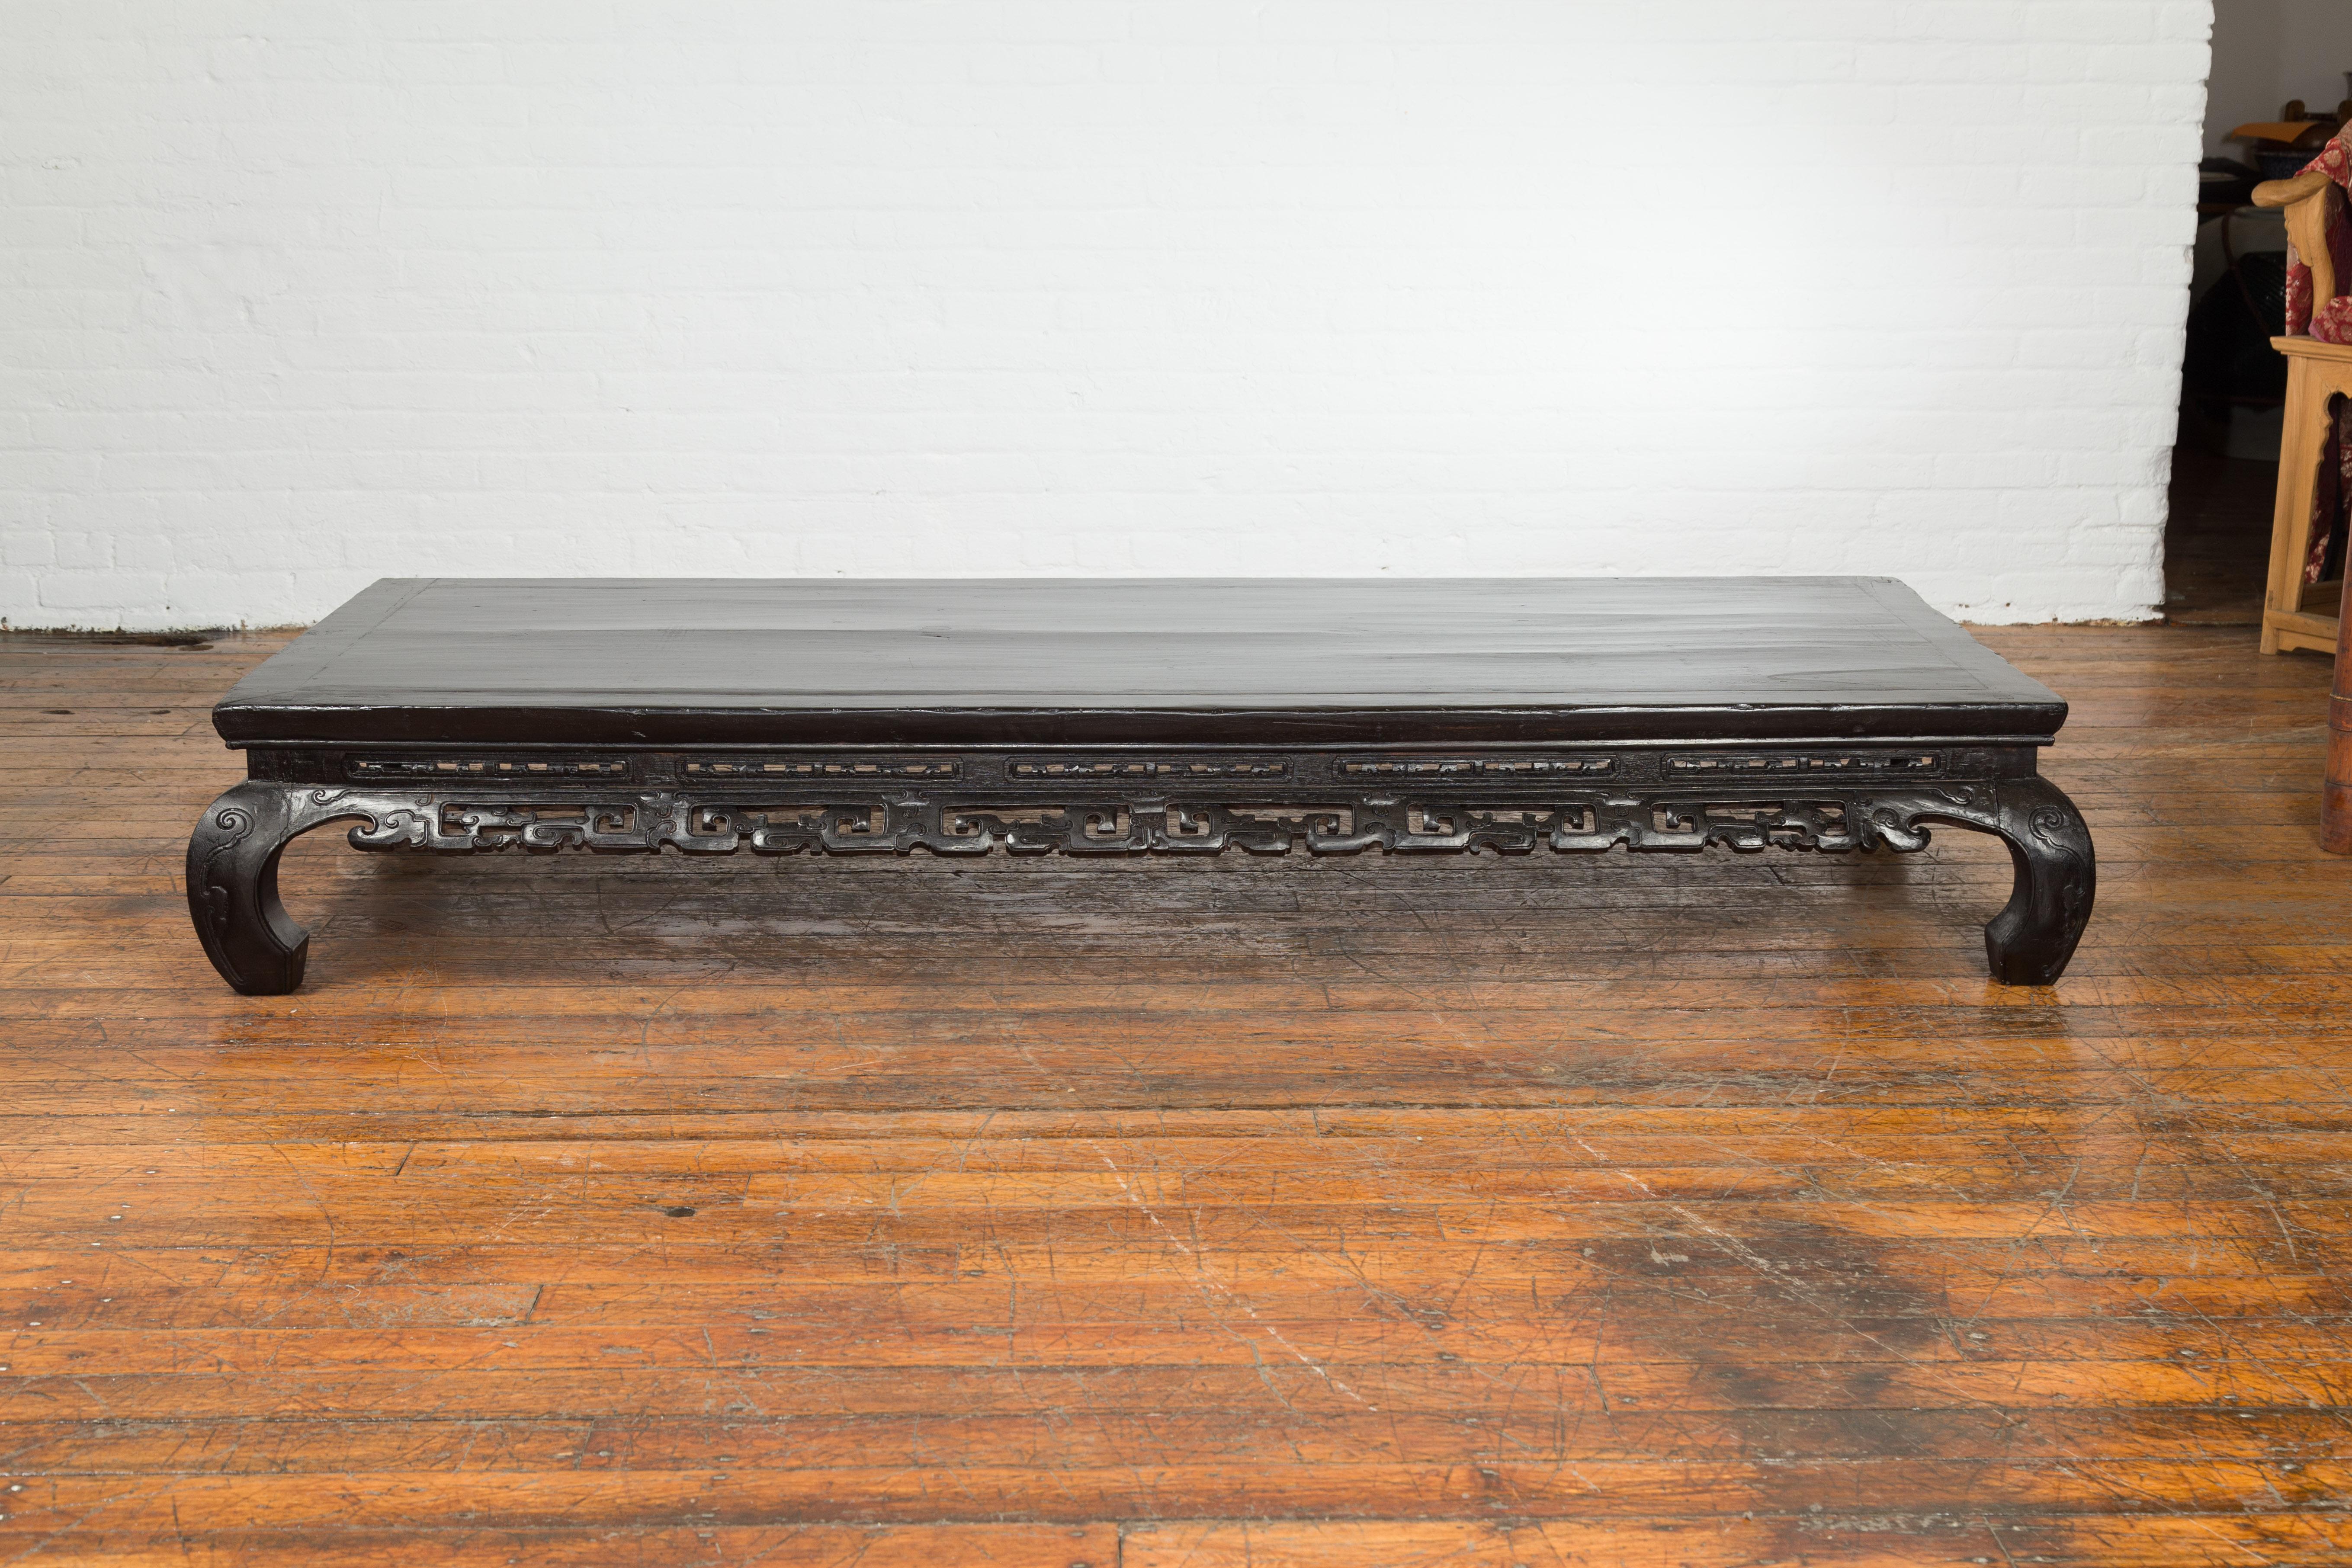 A Chinese antique Qing Dynasty period low kang black lacquer coffee table from the 19th century, with carved apron and chow legs. Created in China during the 19th century, this Qing Dynasty coffee table features a rectangular top with central board,